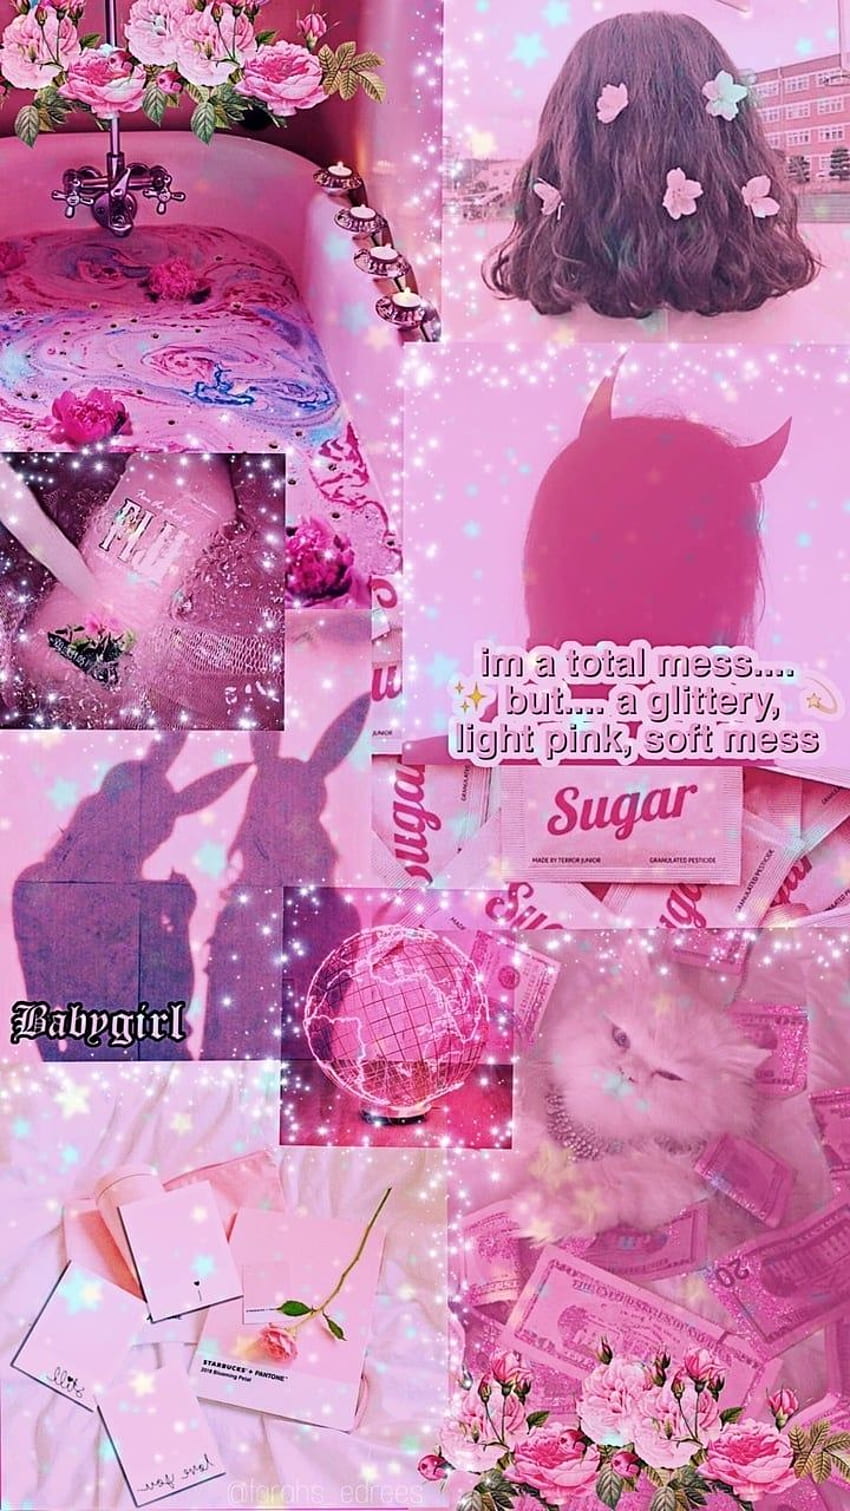 Aesthetic pink background with glitter, flowers, and the words 